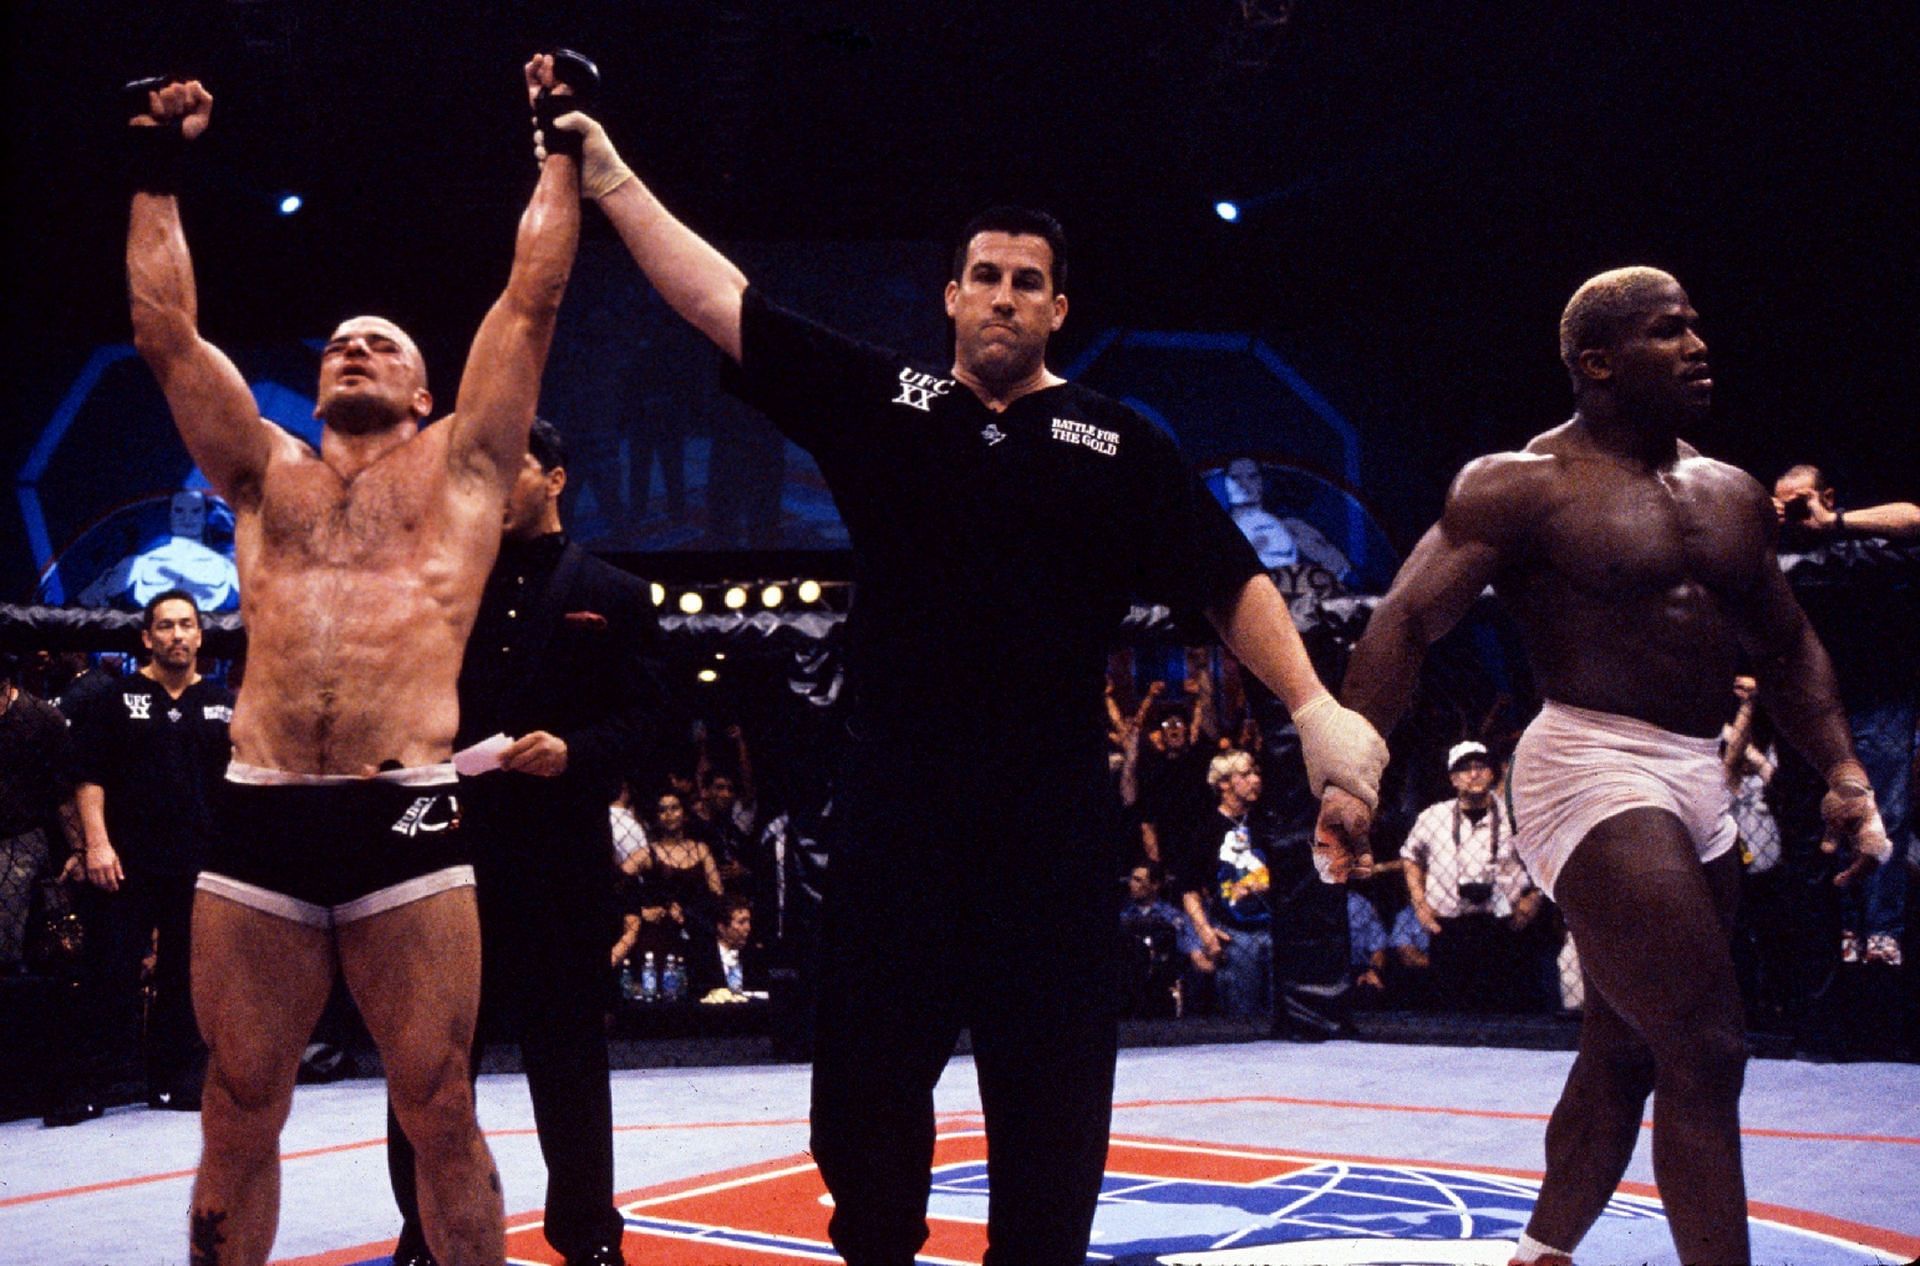 Bas Rutten is a legend of MMA, but the Dutchman only fought in the octagon twice